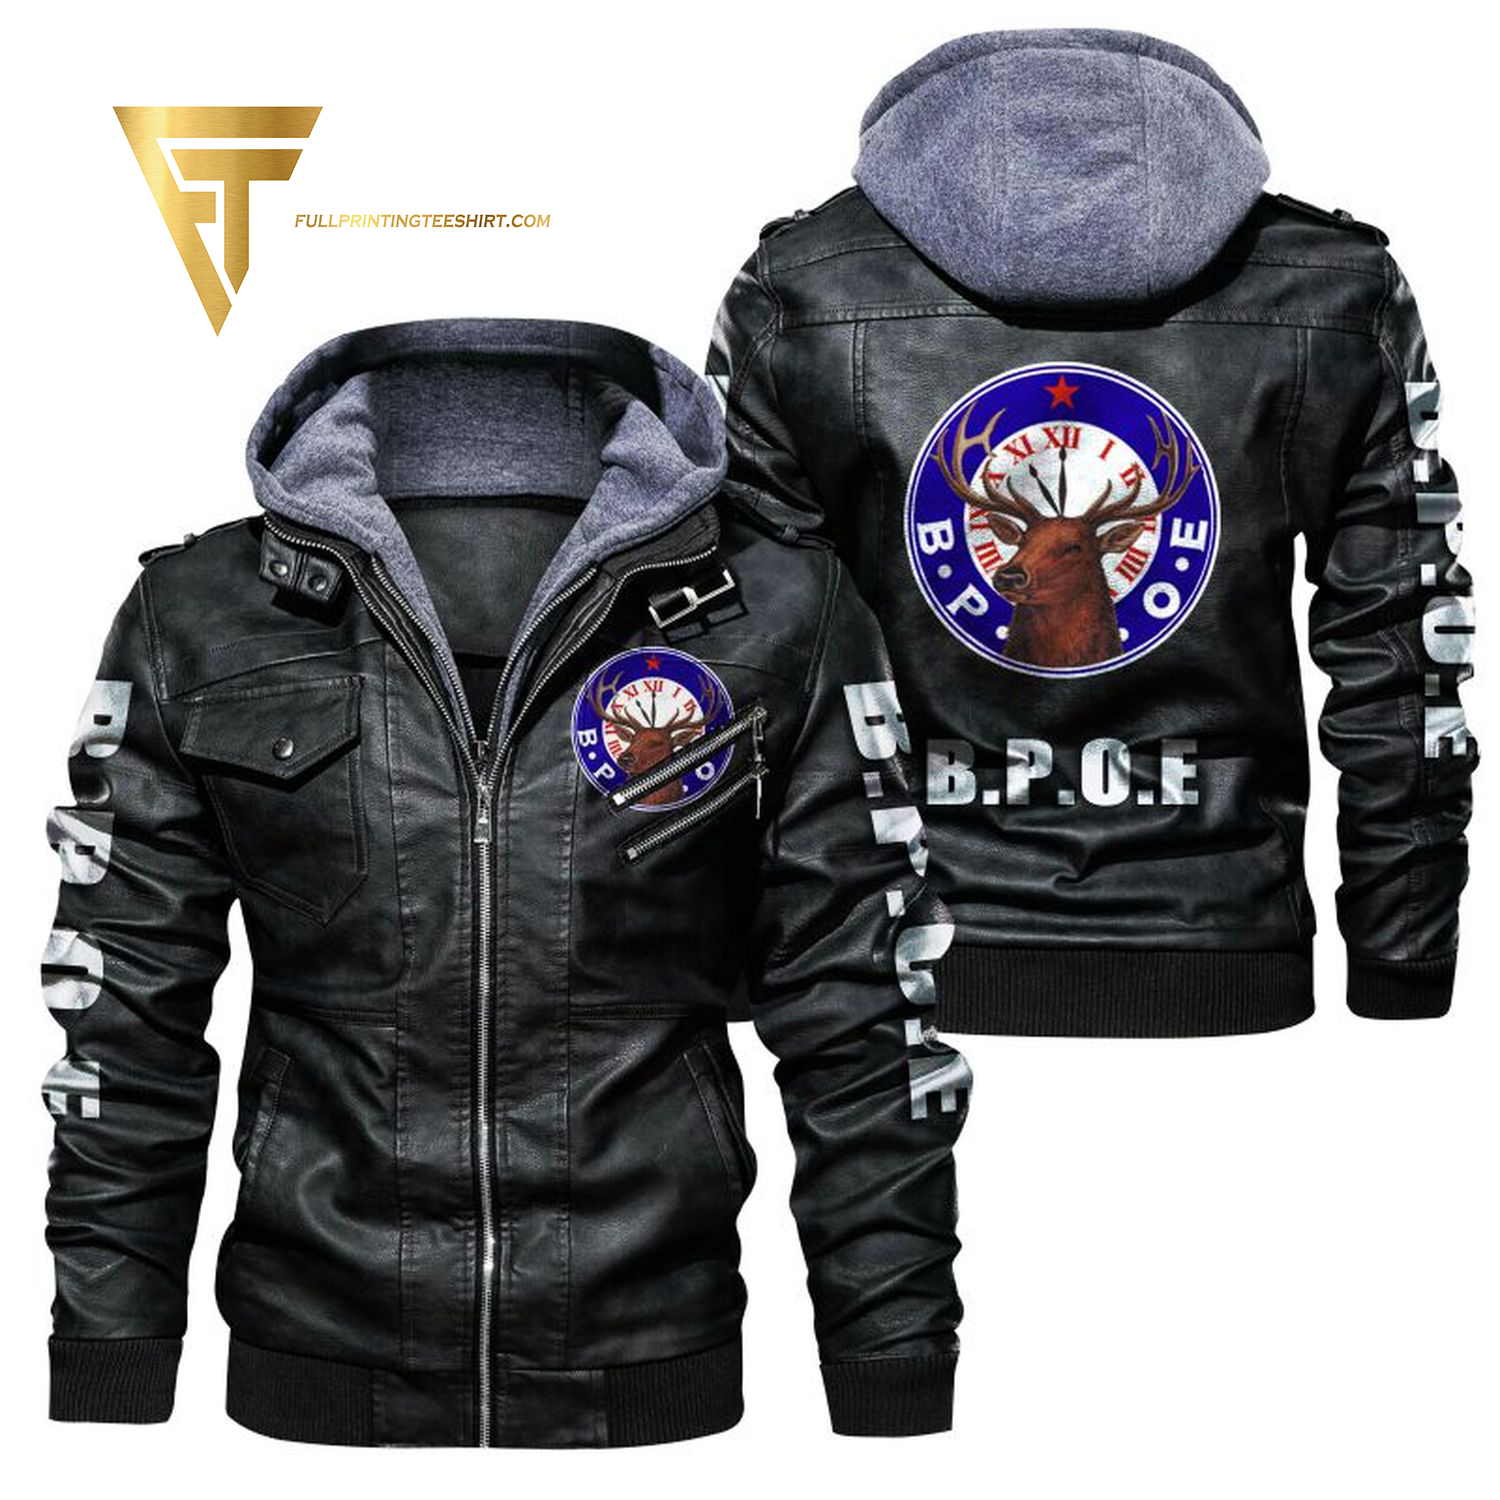 Benevolent And Protective Order Of Elks Full Print Leather Jacket